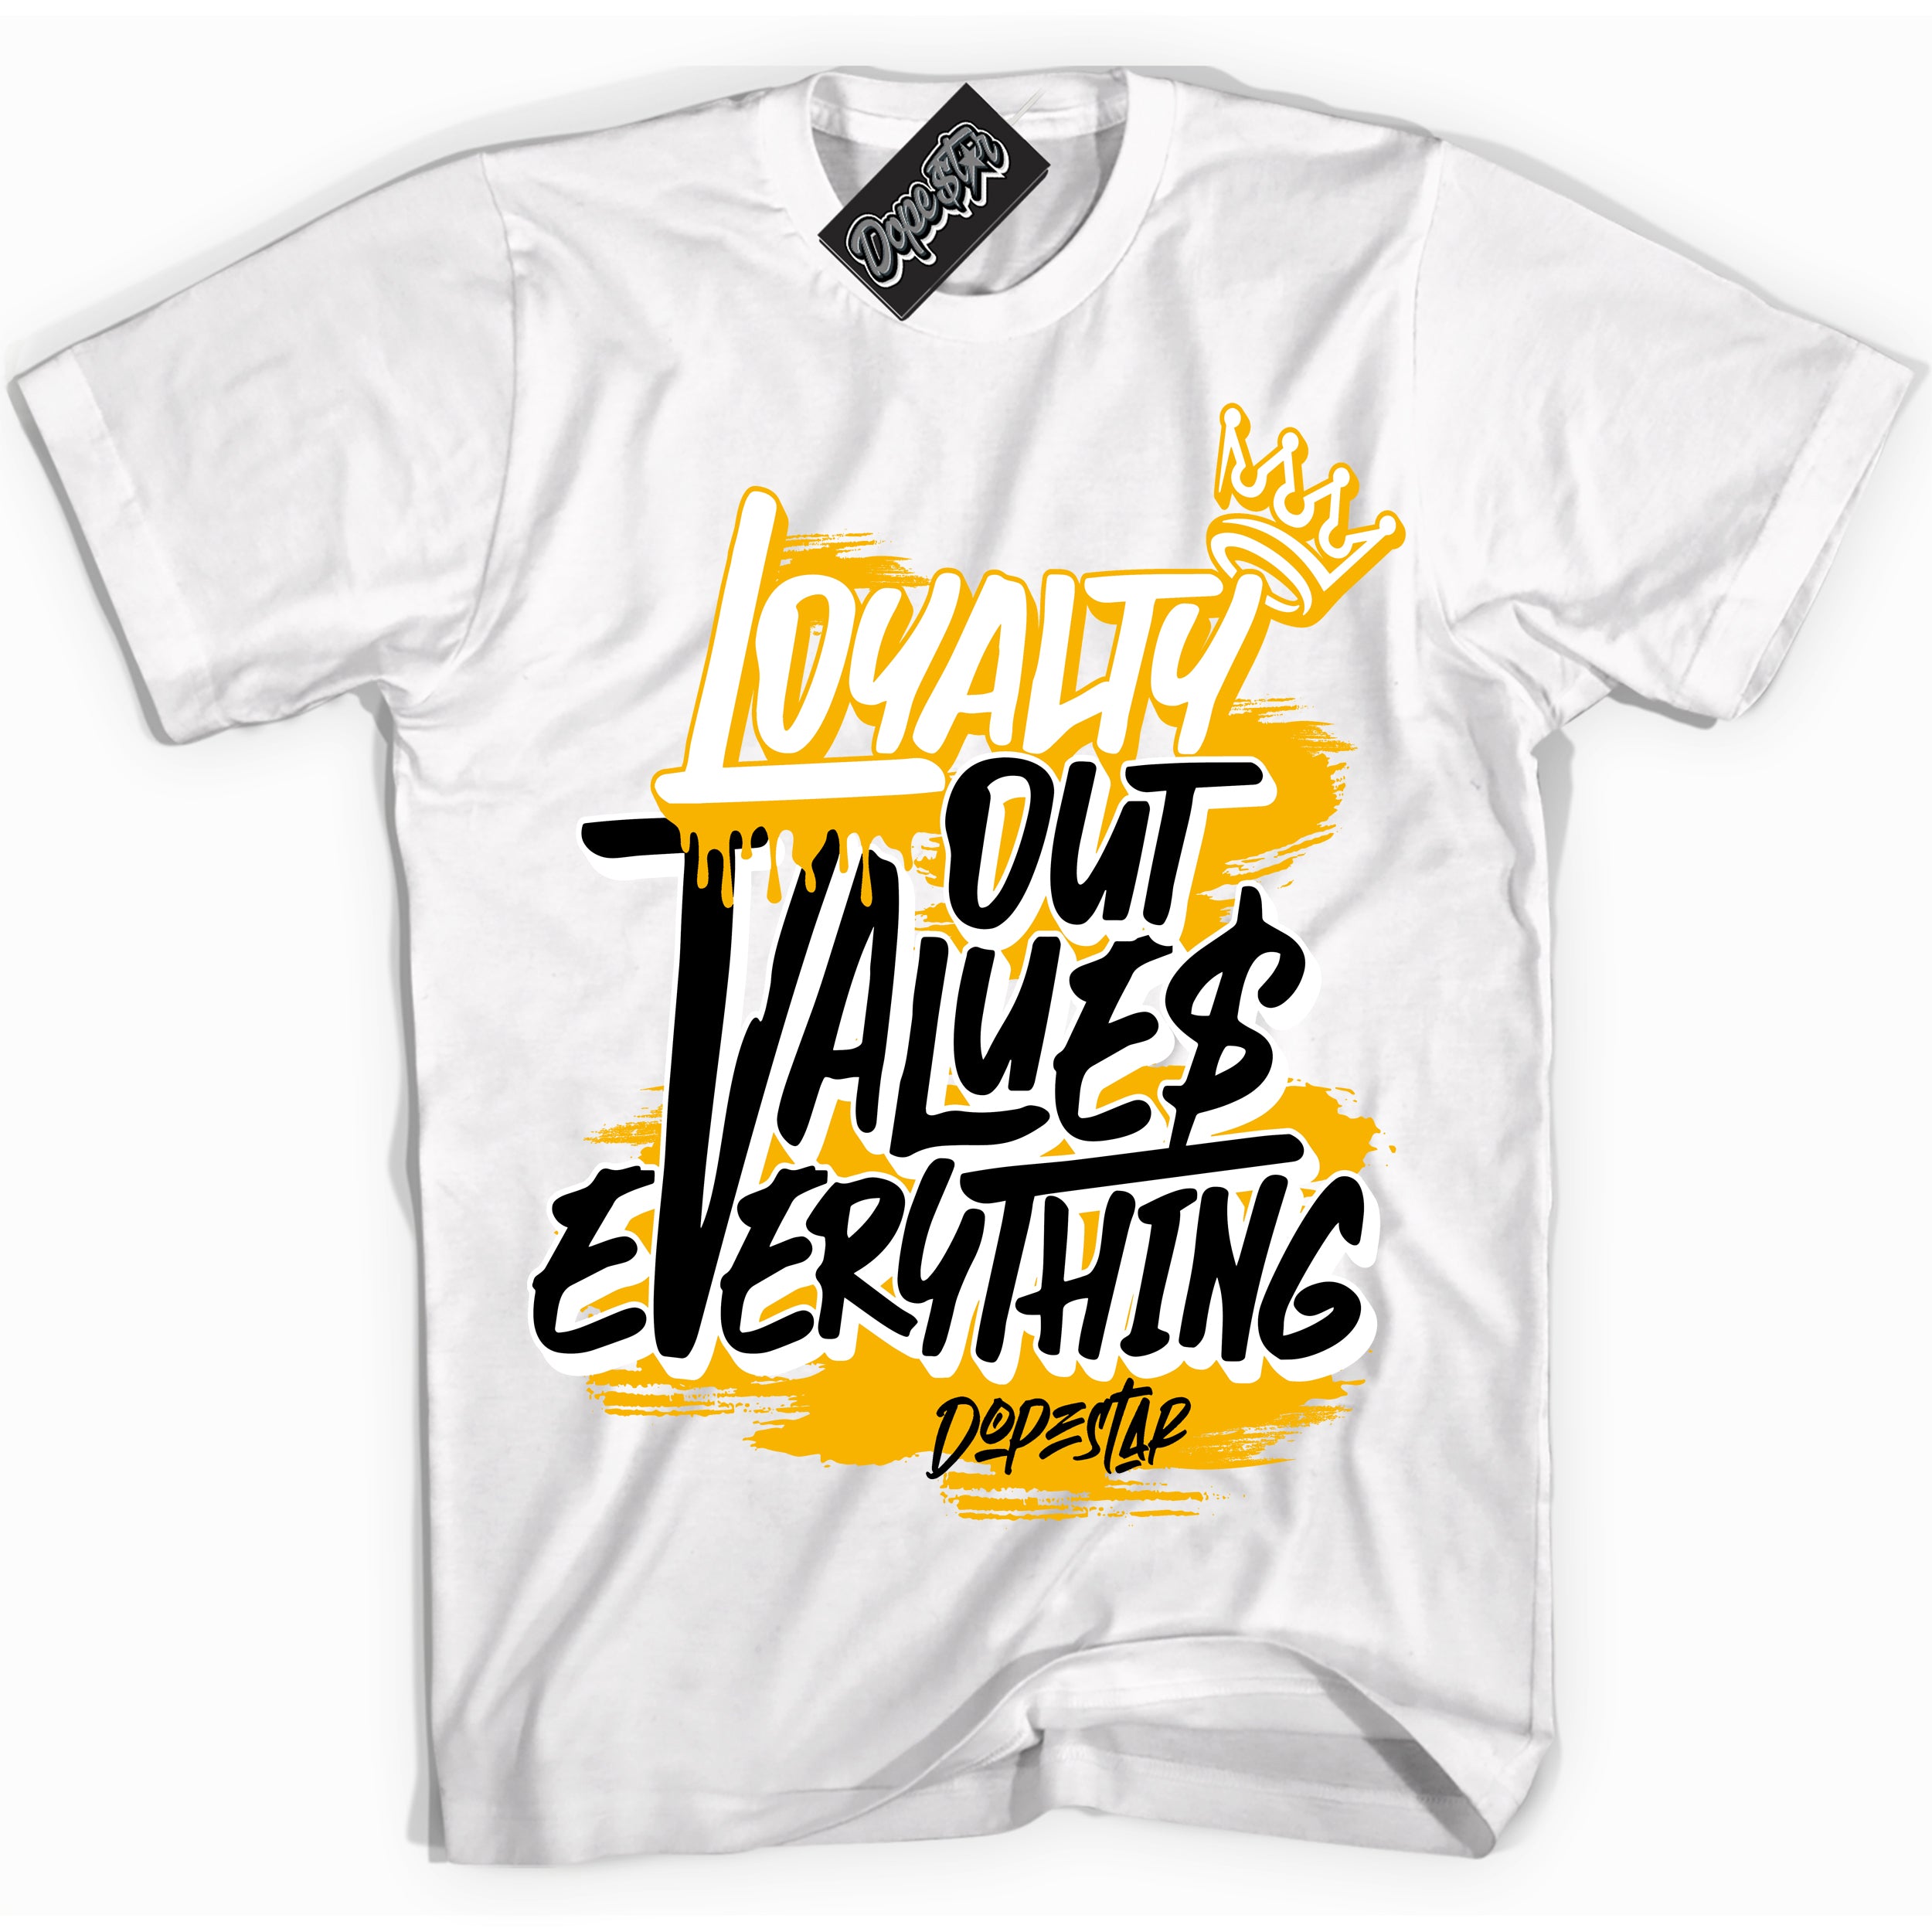 Cool White Shirt with “ Loyalty Out Values Everything” design that perfectly matches Reverse Goldenrod 2024 Sneakers.